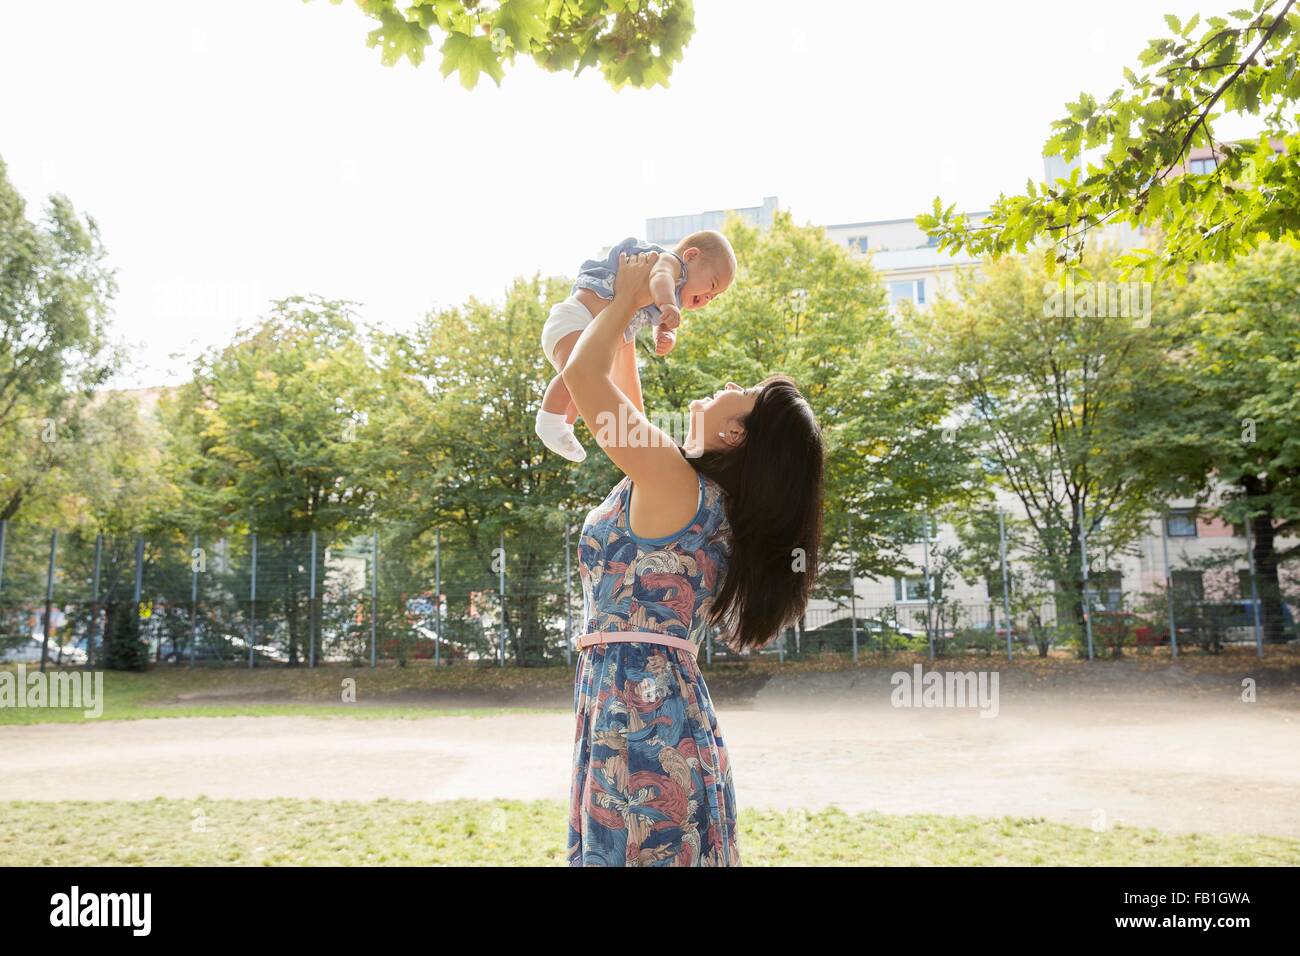 Grand-mère holding up baby granddaughter in park Banque D'Images